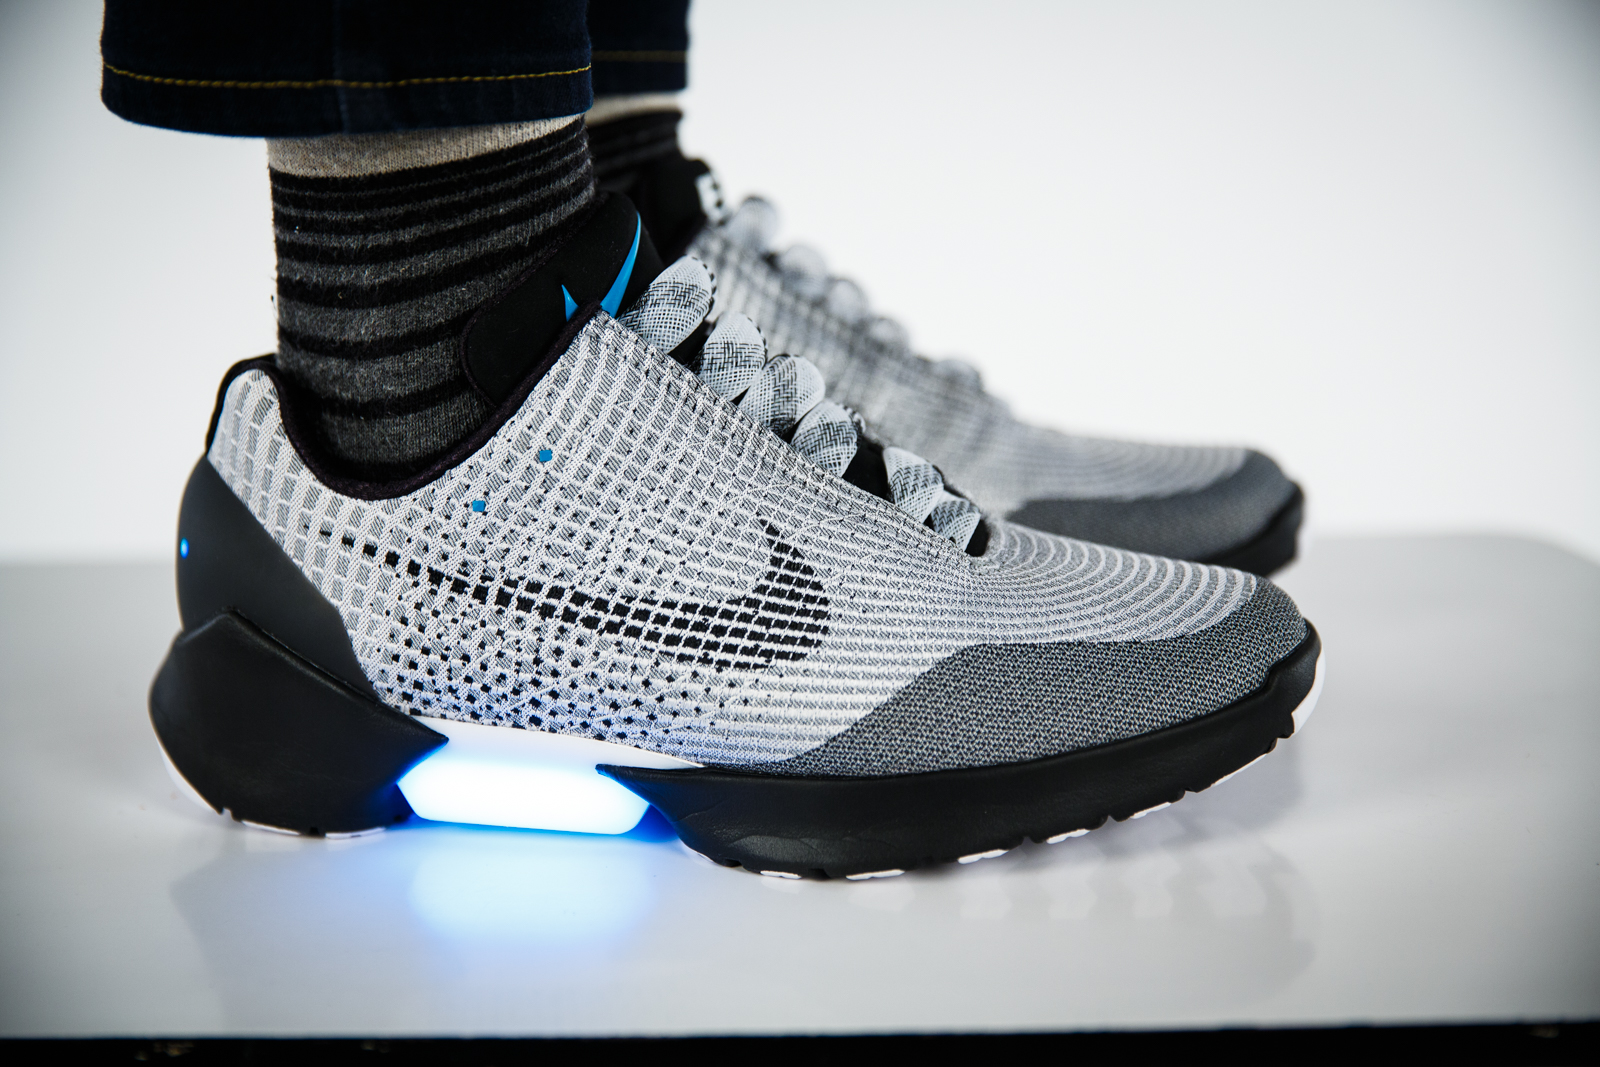 The HyperAdapt 1.0: exactly what Back to the Future 2 promised, close enough for now - CNET